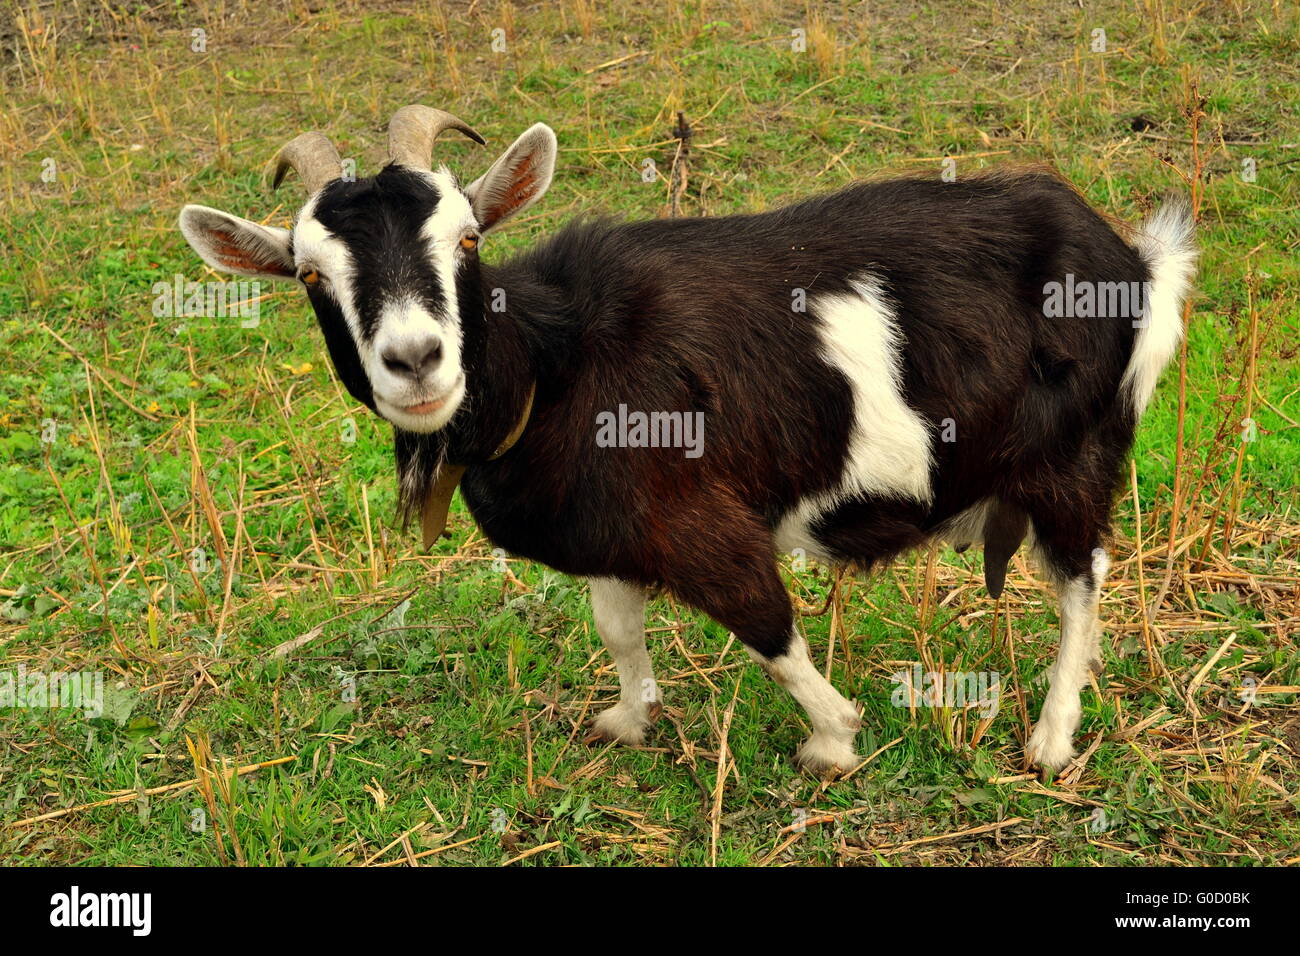 Goat posing on the grass, a goat funny facial expr Stock Photo